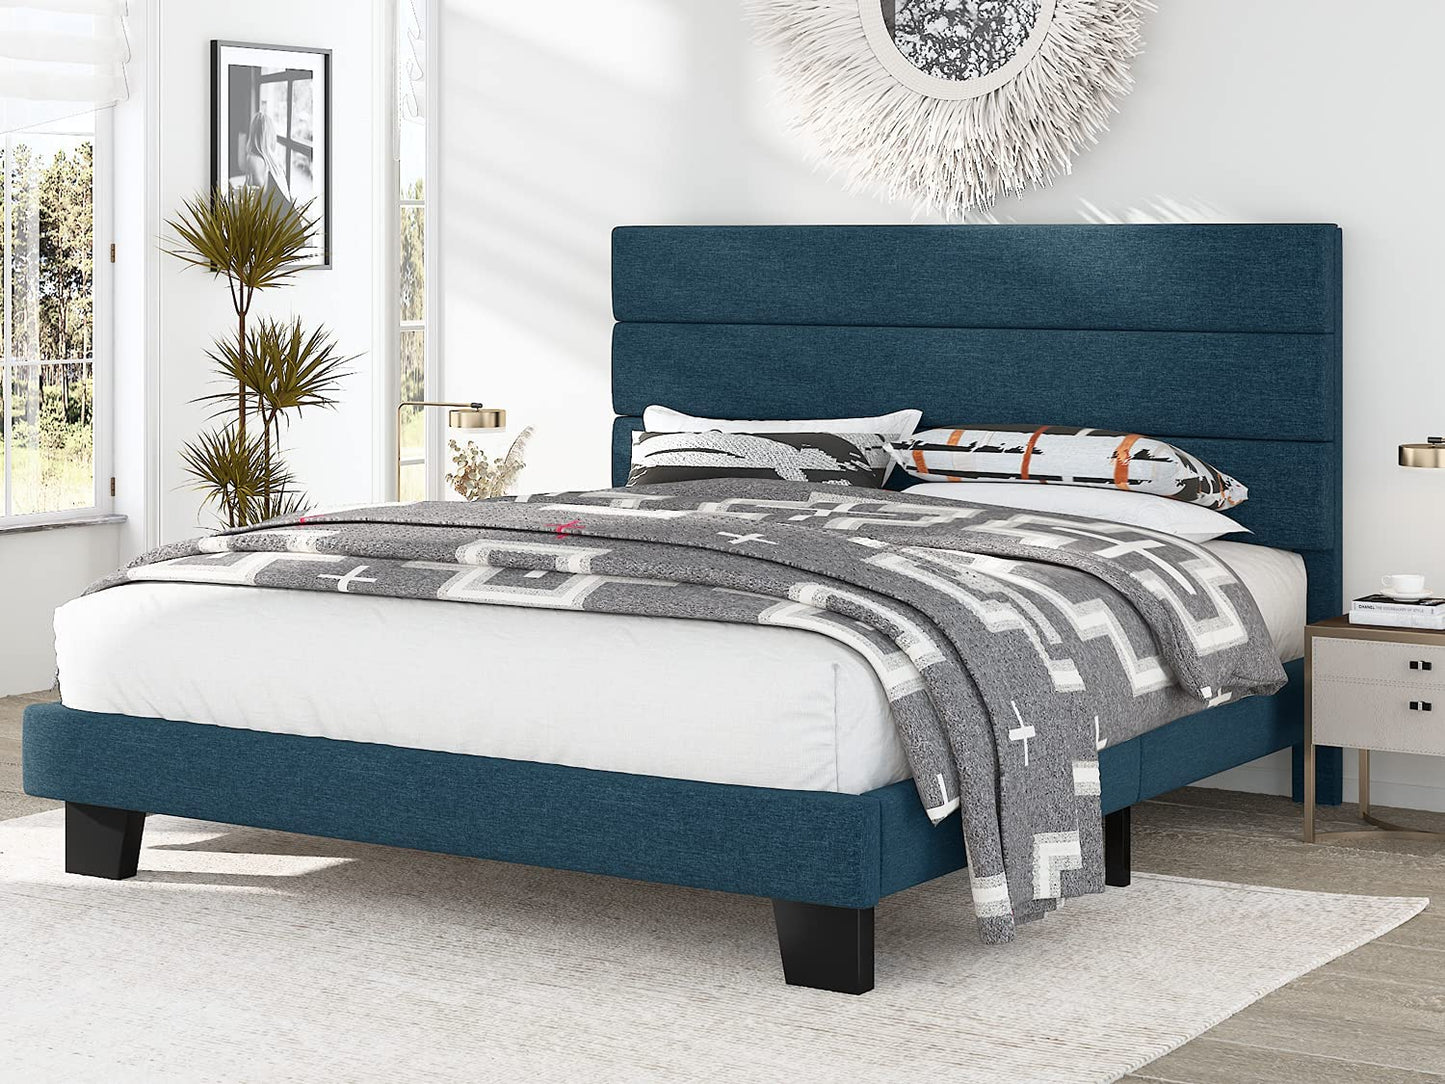 Allewie Full Size Fabric Fully Upholstered Platform Bed Frame with Headboard and Strong Wooden Slats, Navy Blue